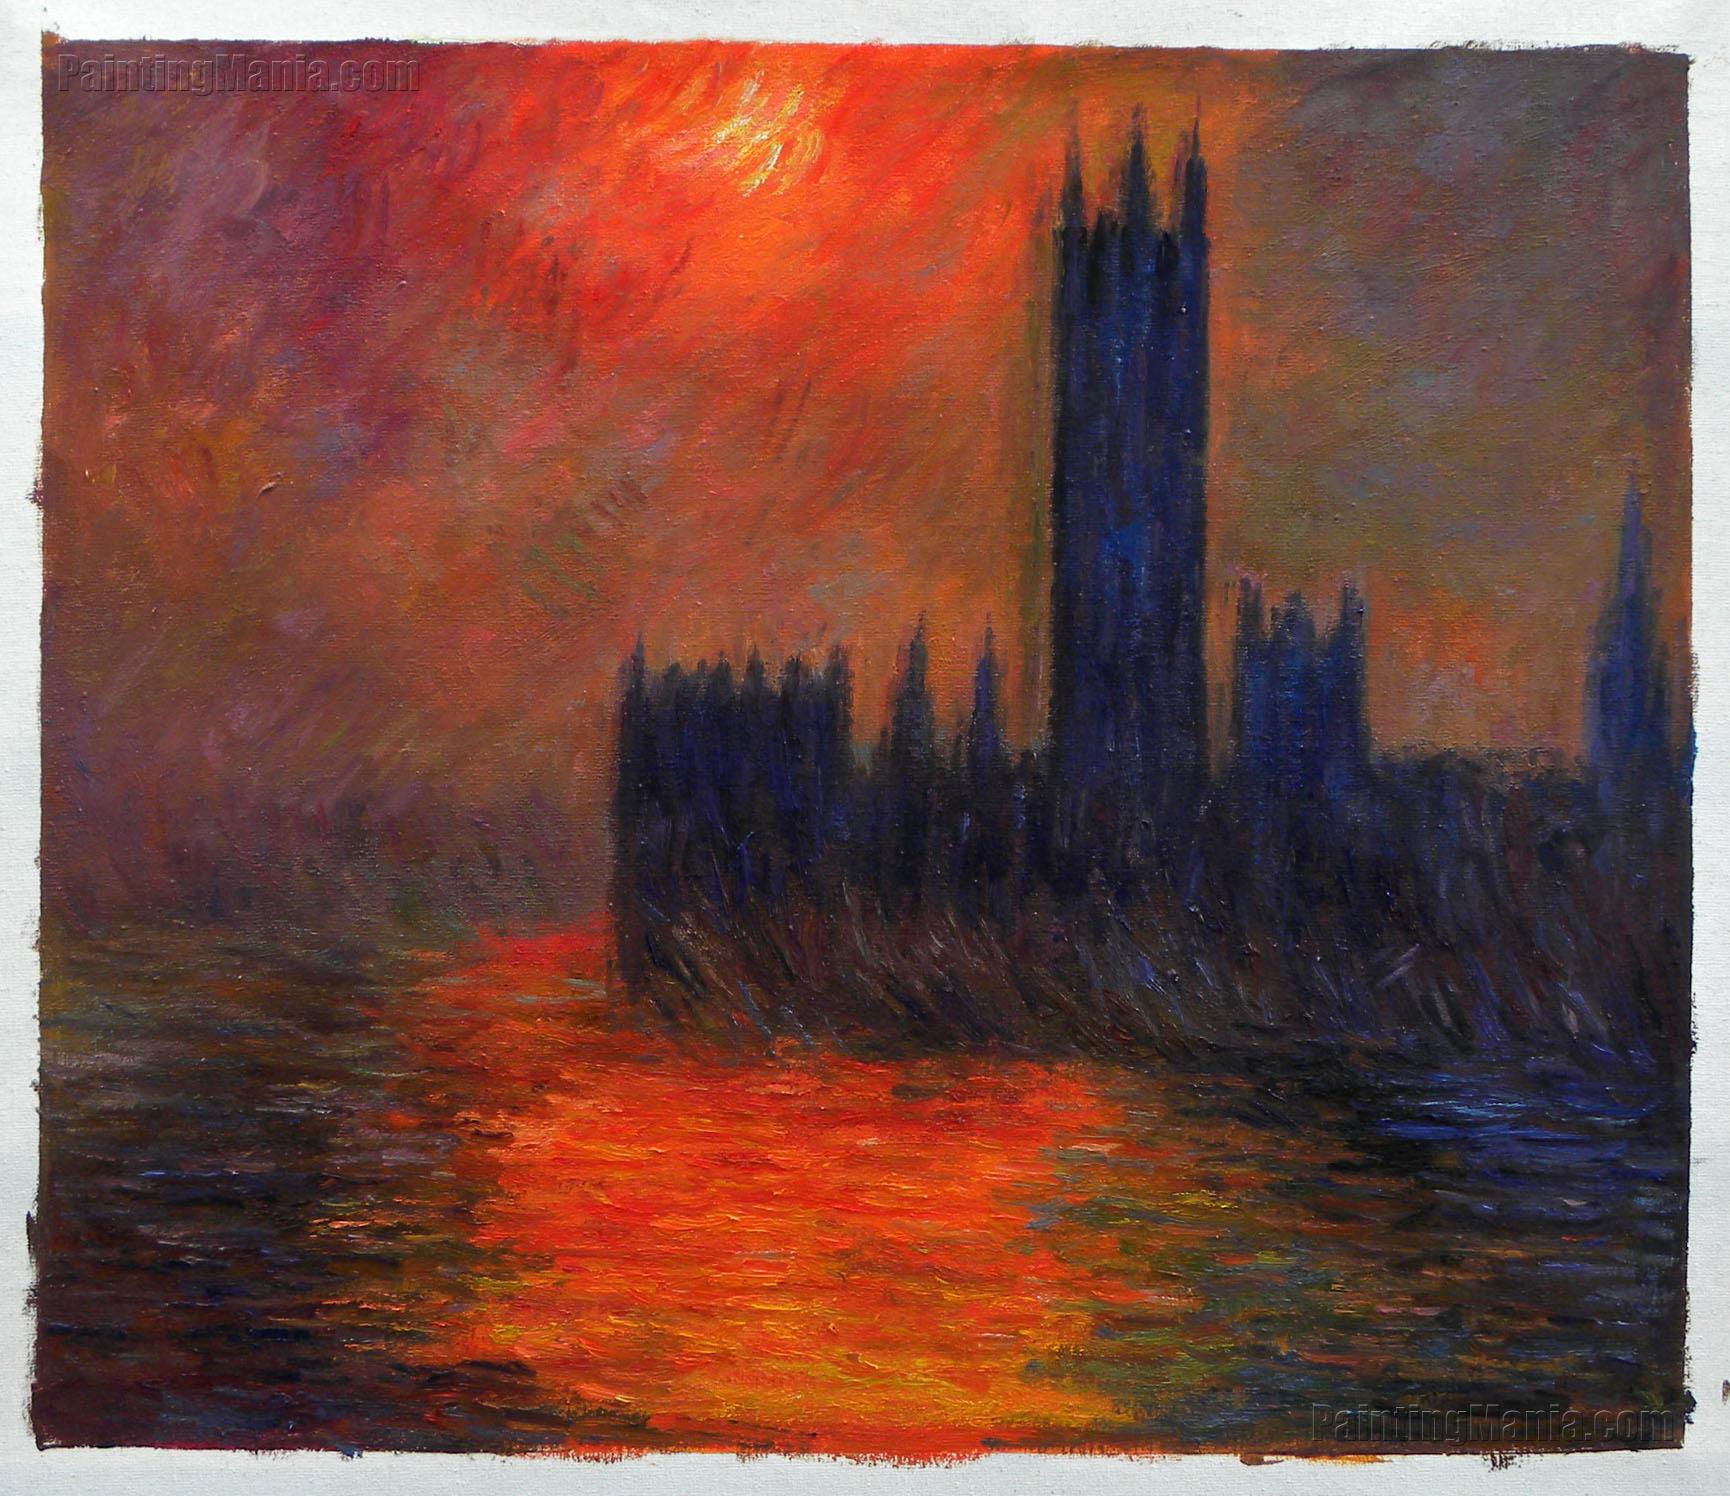 Houses of Parliament, Sunset